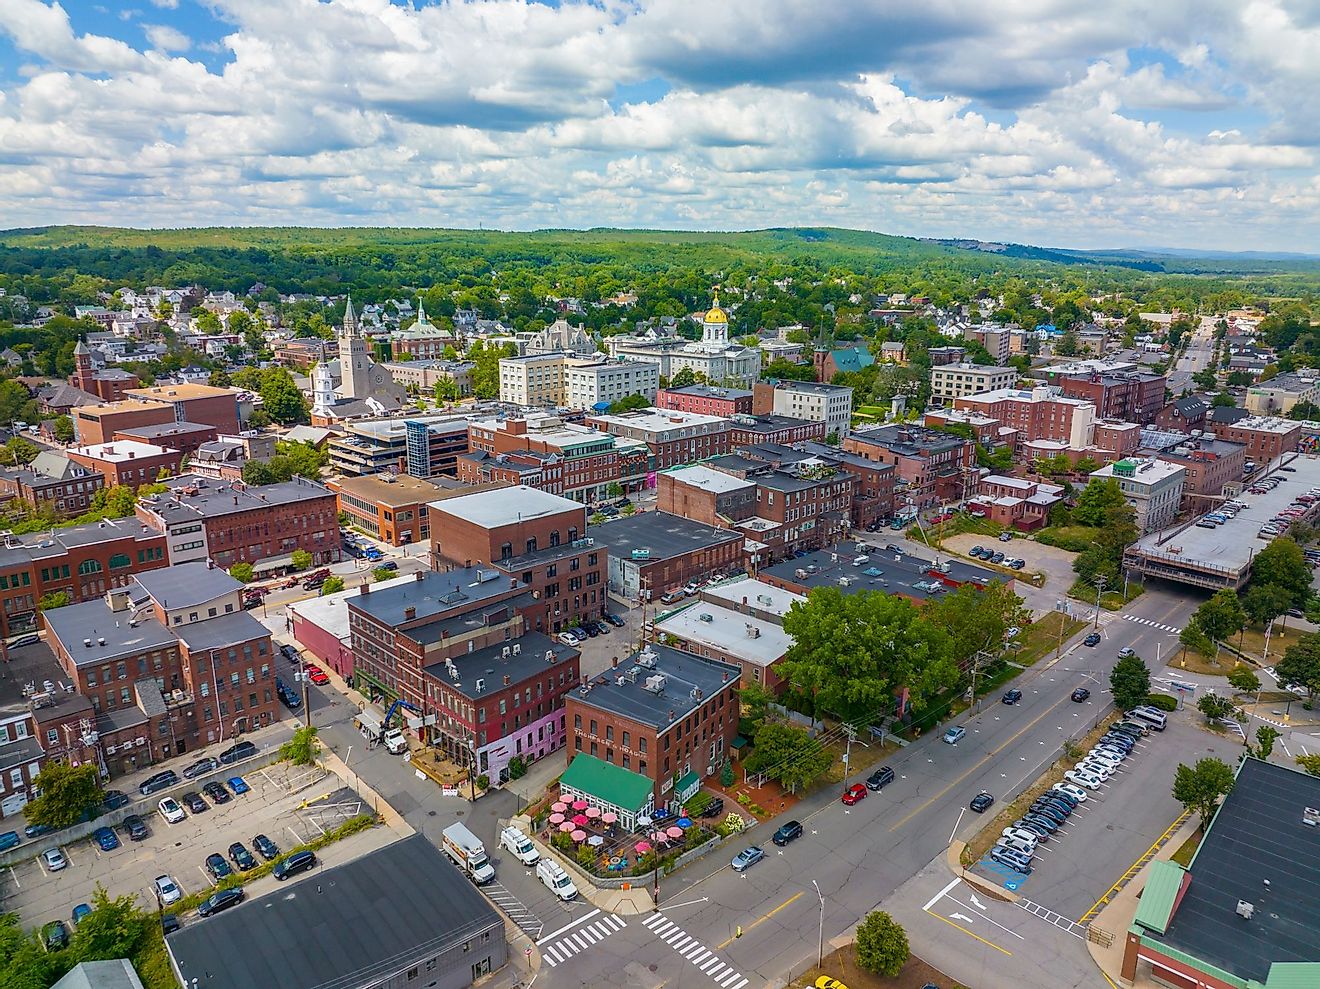 Aerial view of the Concord downtown commercial center on Main Street near New Hampshire State House. Editorial credit: Wangkun Jia / Shutterstock.com